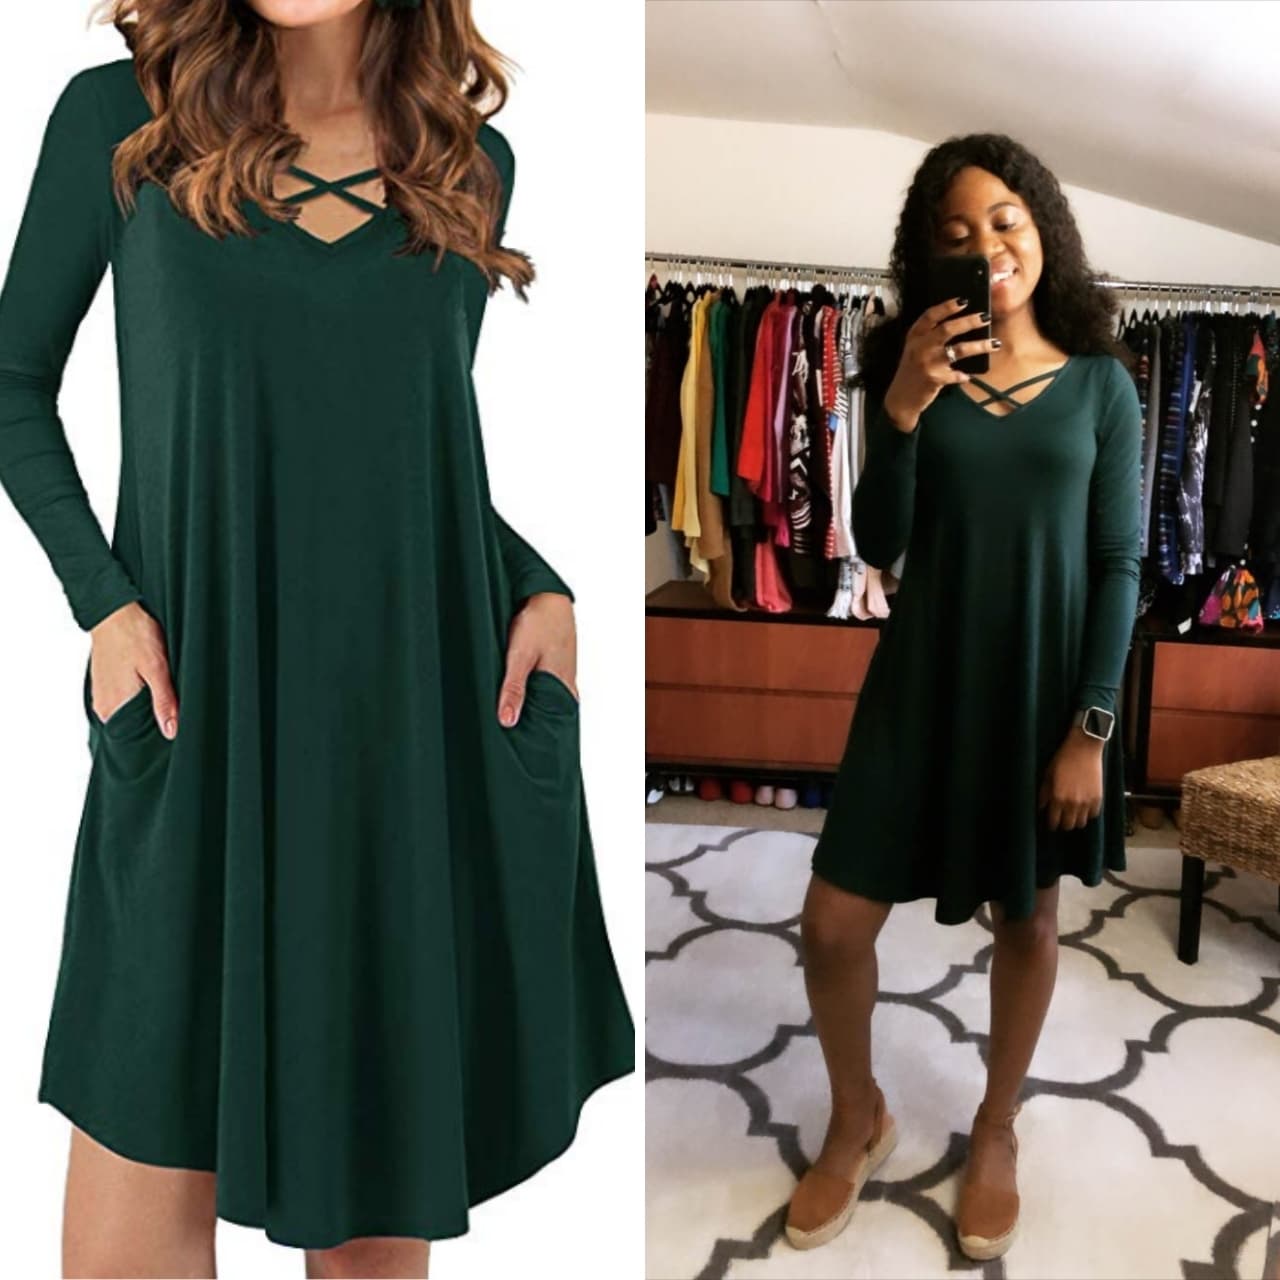 Latest Amazon fashion haul sharing the best and most affordable Amazon fashion under $40! This review post features tops, dresses, jewelry, pants and more!